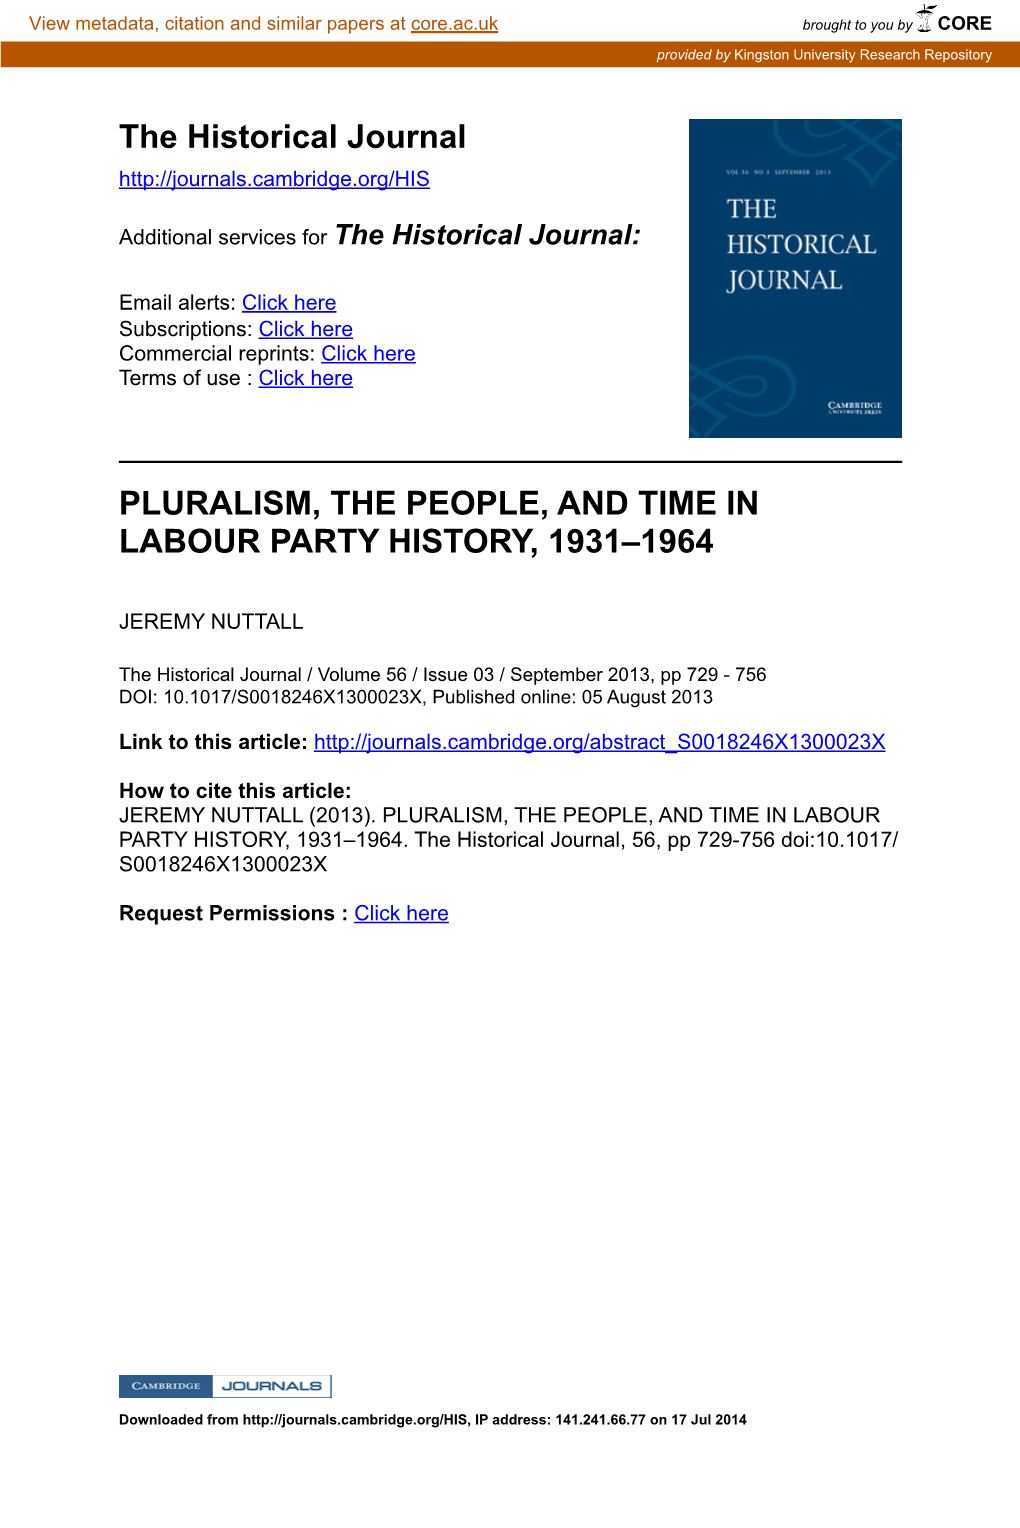 The Historical Journal PLURALISM, the PEOPLE, and TIME IN